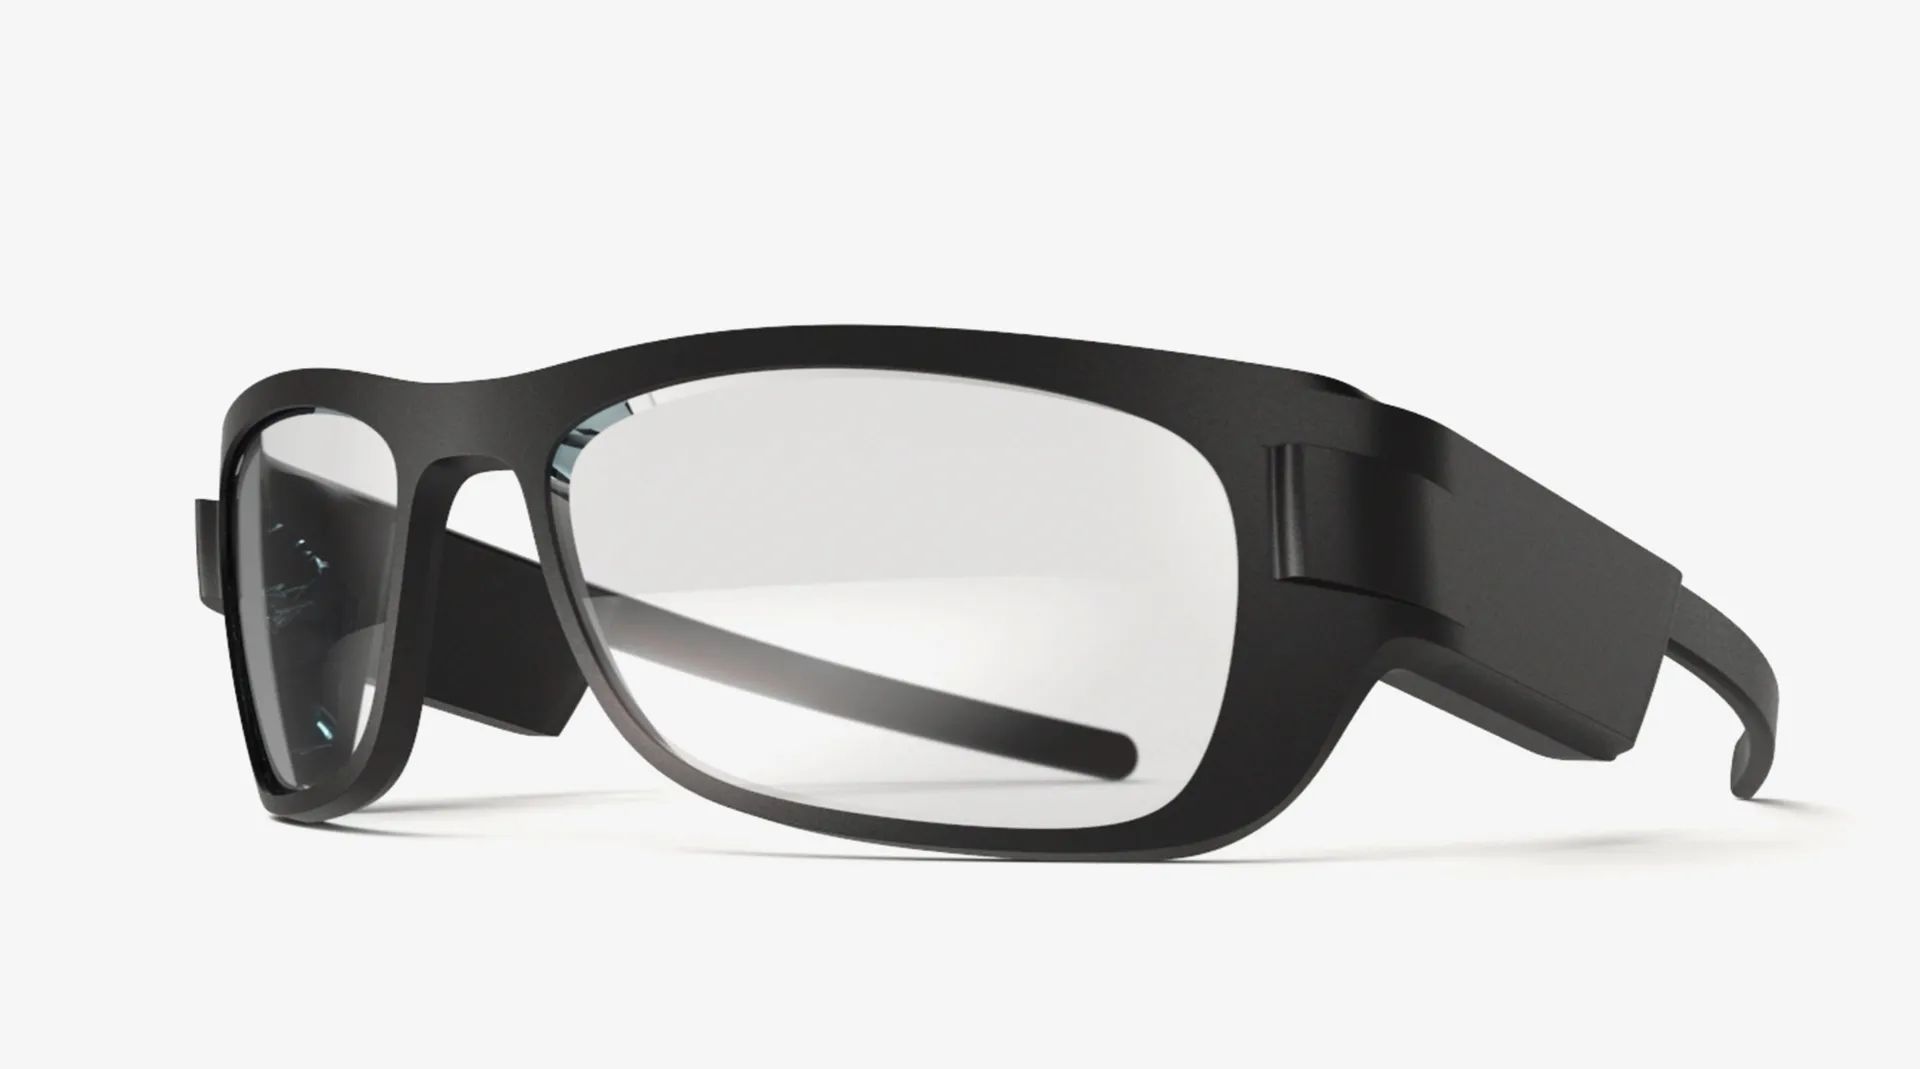 What Are Digital Smart Lens Price For Glasses